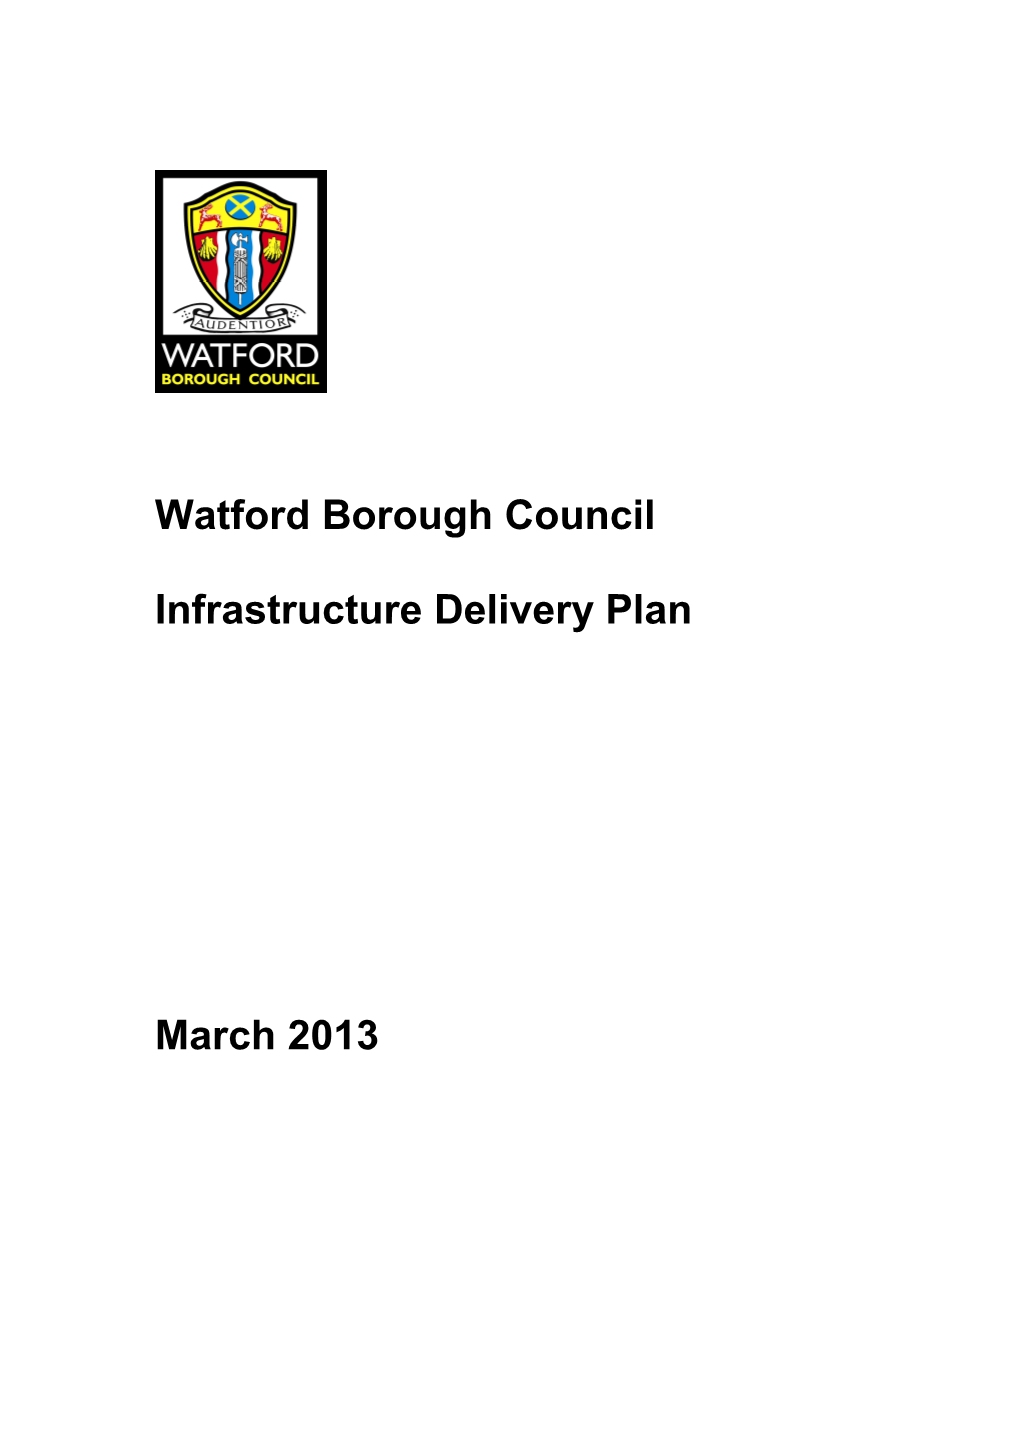 Infrastructure Delivery Plan 2013 Watford Borough Council